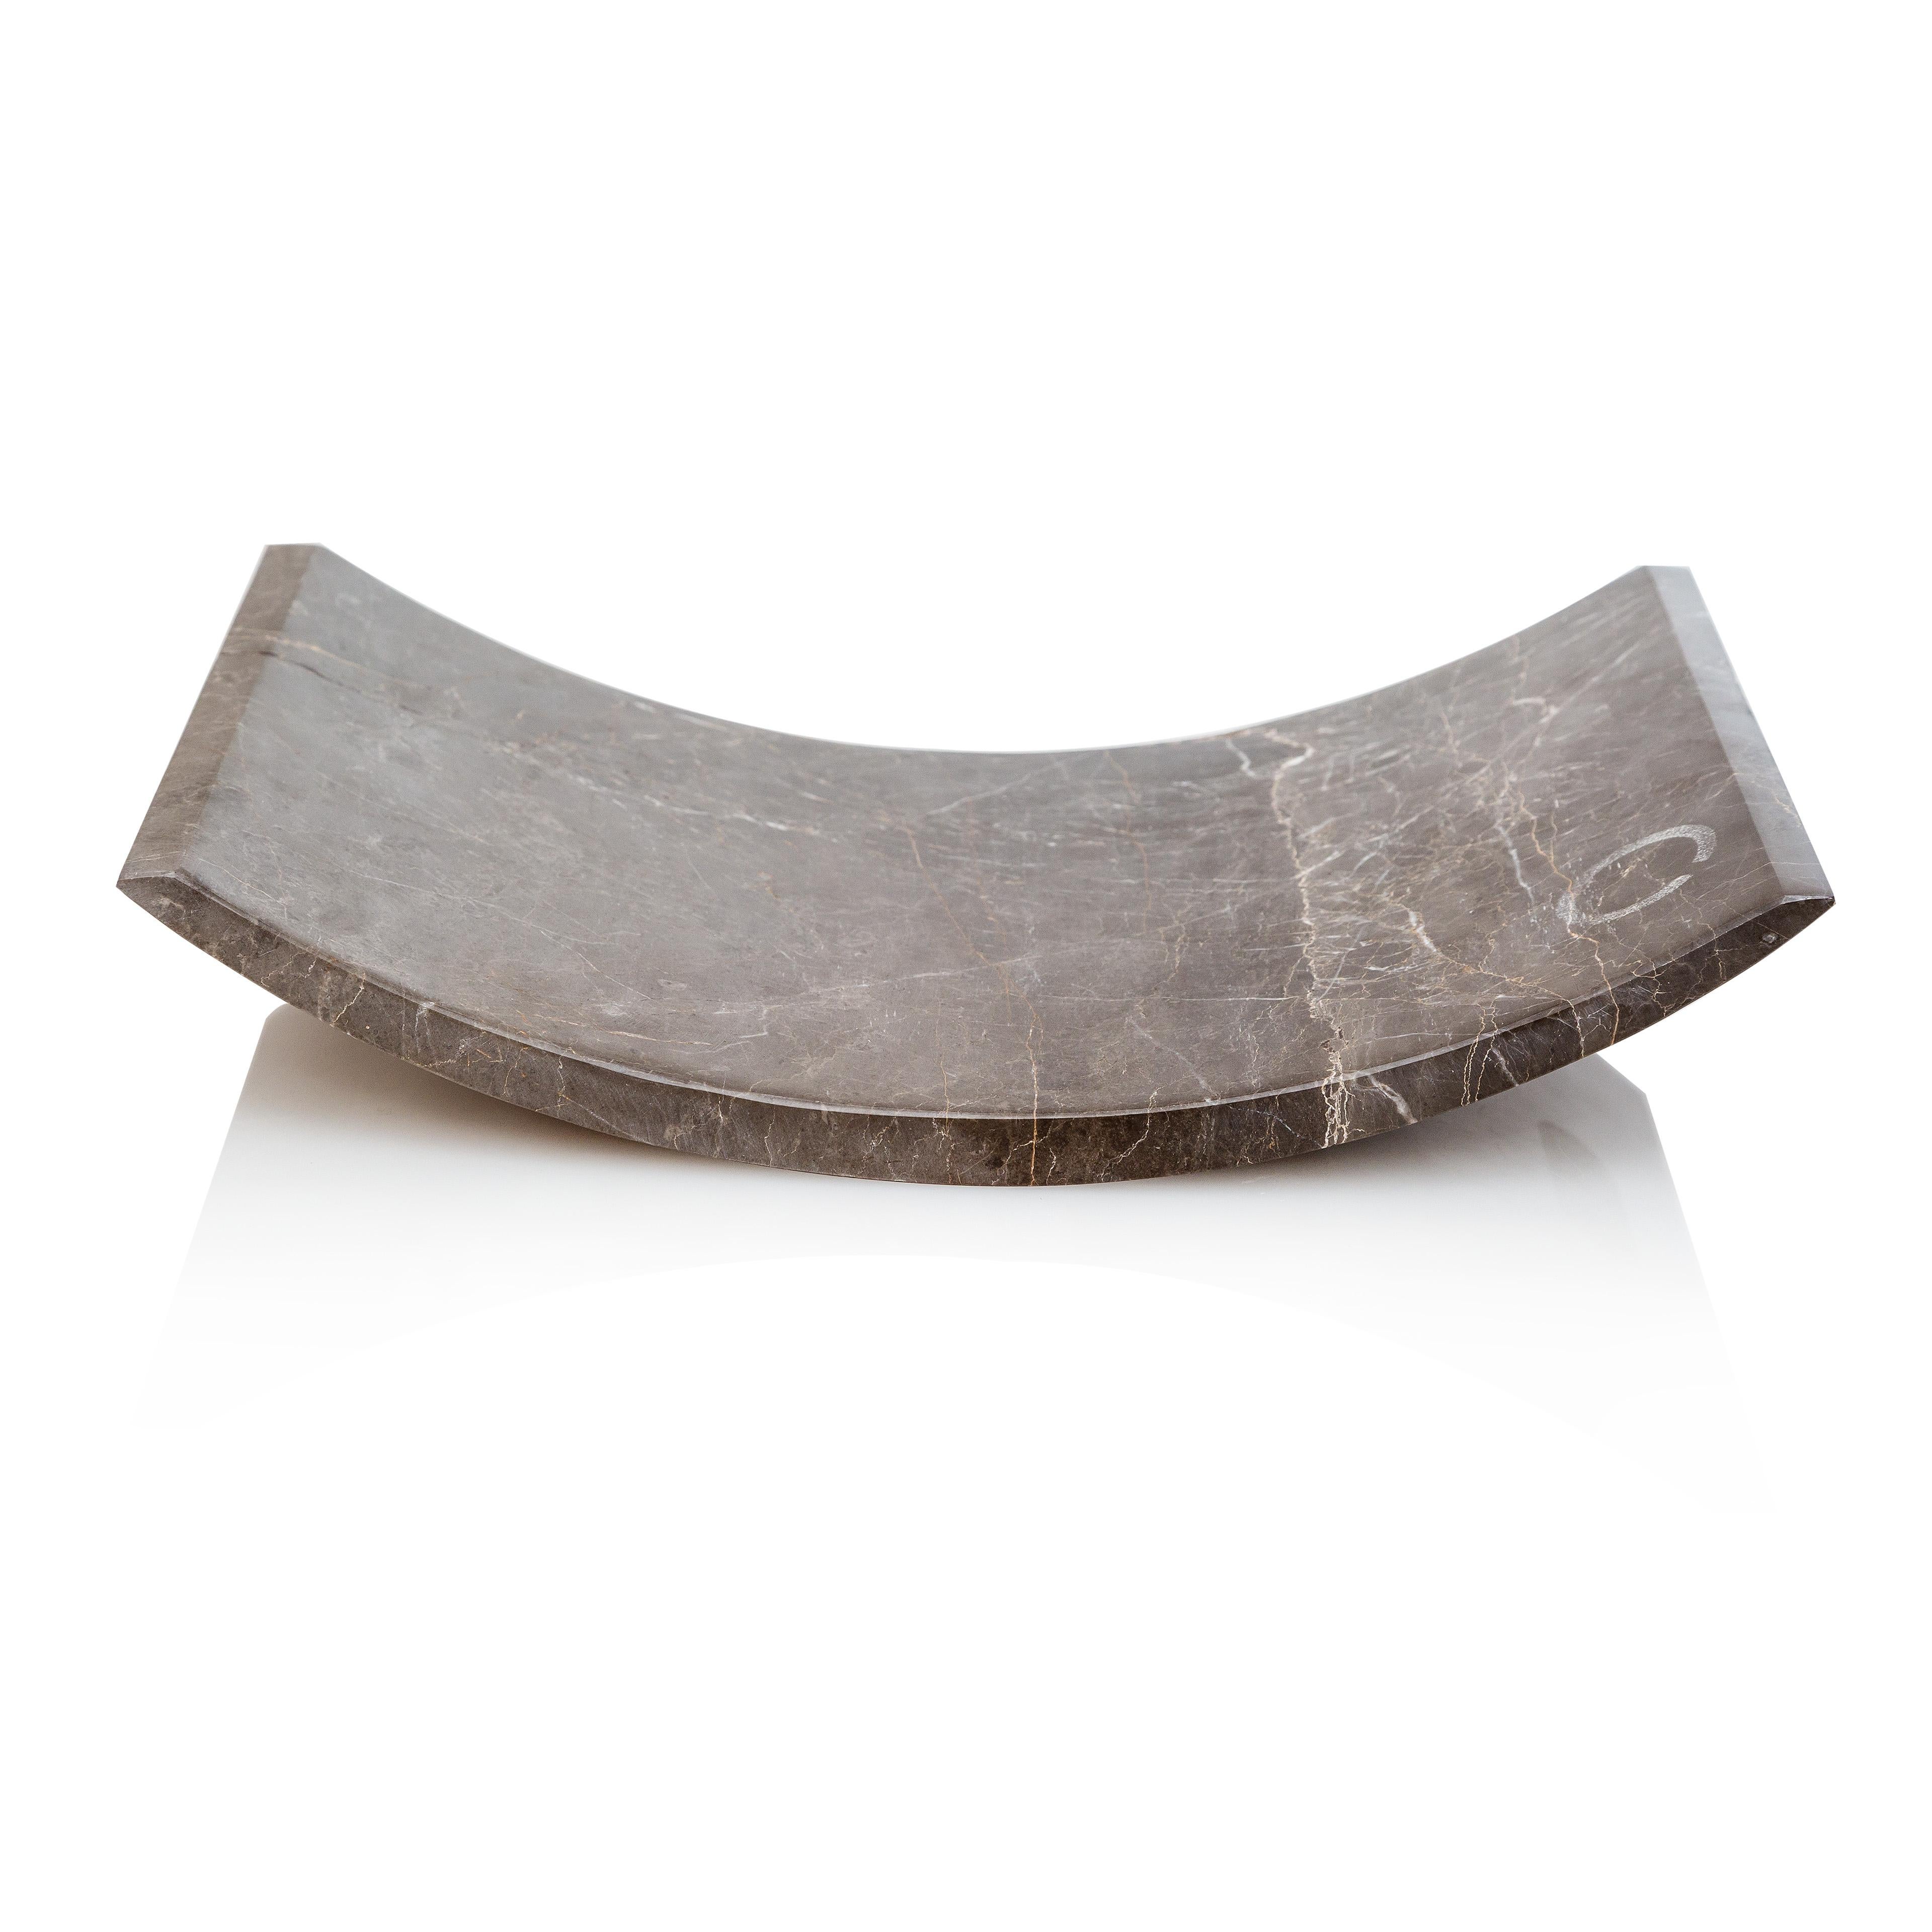 This platter is designed as a homogeneous volume, wishing to engage the senses around the plasticity of marble. It is carved off a single piece of marble without joints or seams. 

Hammock platter has a fine mat finish, revealing the unique color